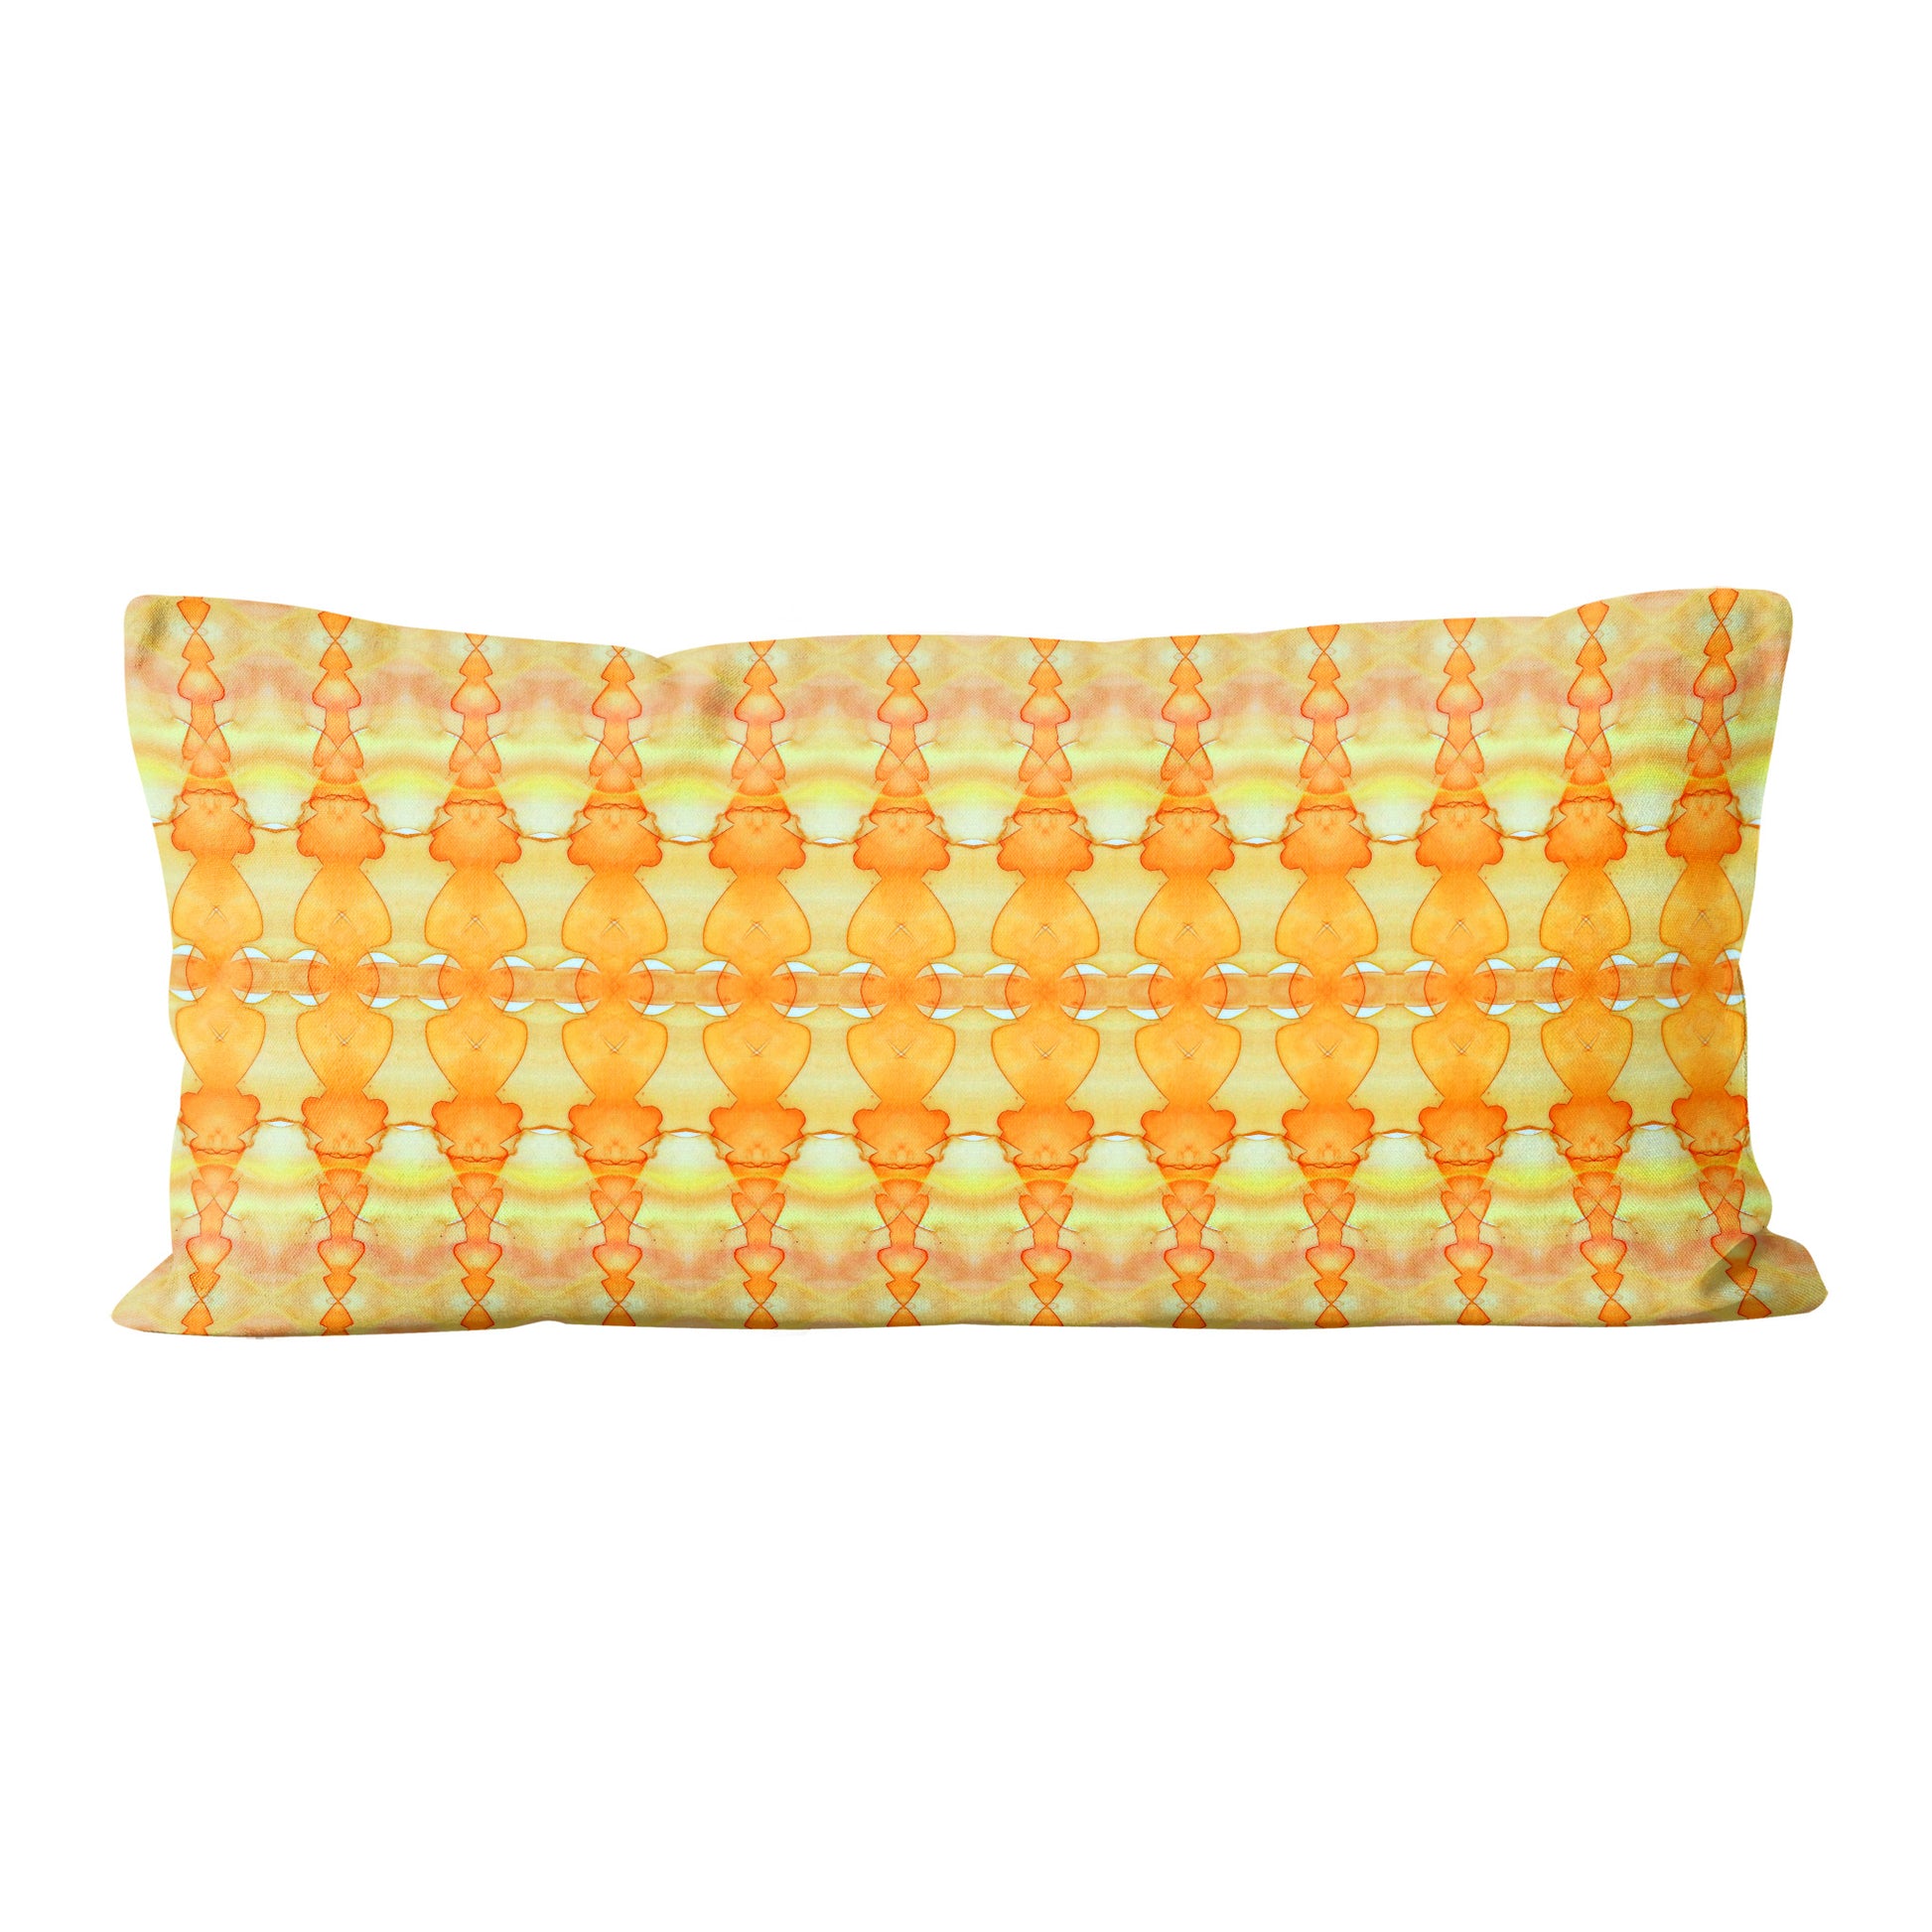 Rectangular lumbar pillow featuring abstract hand-painted yellow and orange pattern 